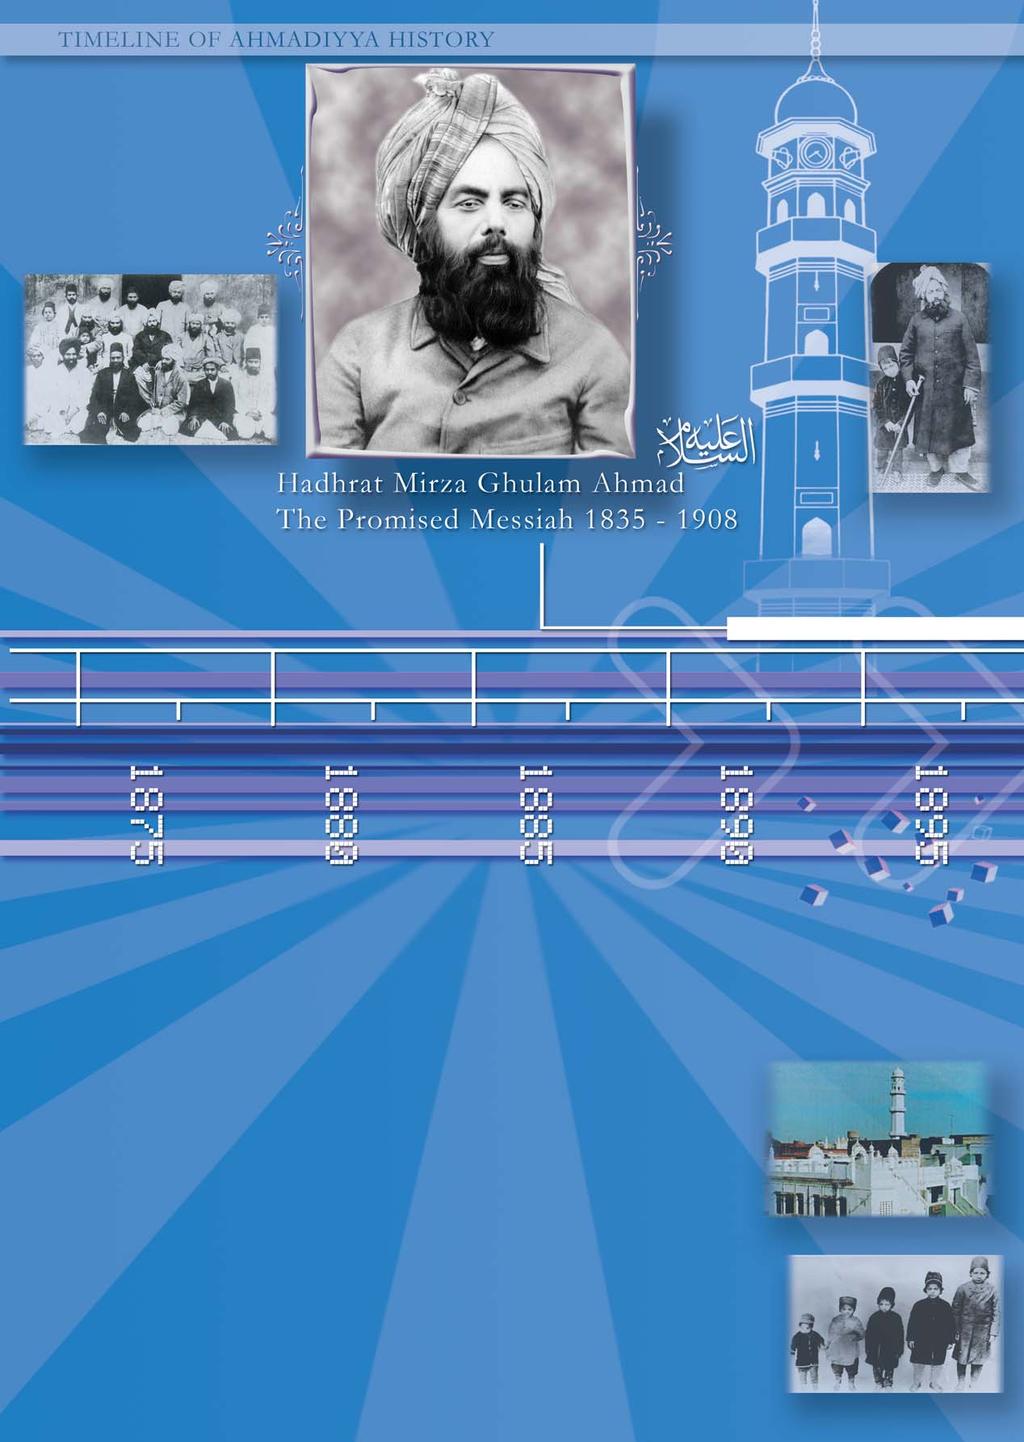 1835 Birth of Hadhrat Mirza Ghulam Ahmad. 1889 First initiation into the Association at Ludhiana on 23rd March. 1890 Hadhrat Mirza Ghulam Ahmad claims to be the Promised Messiah.